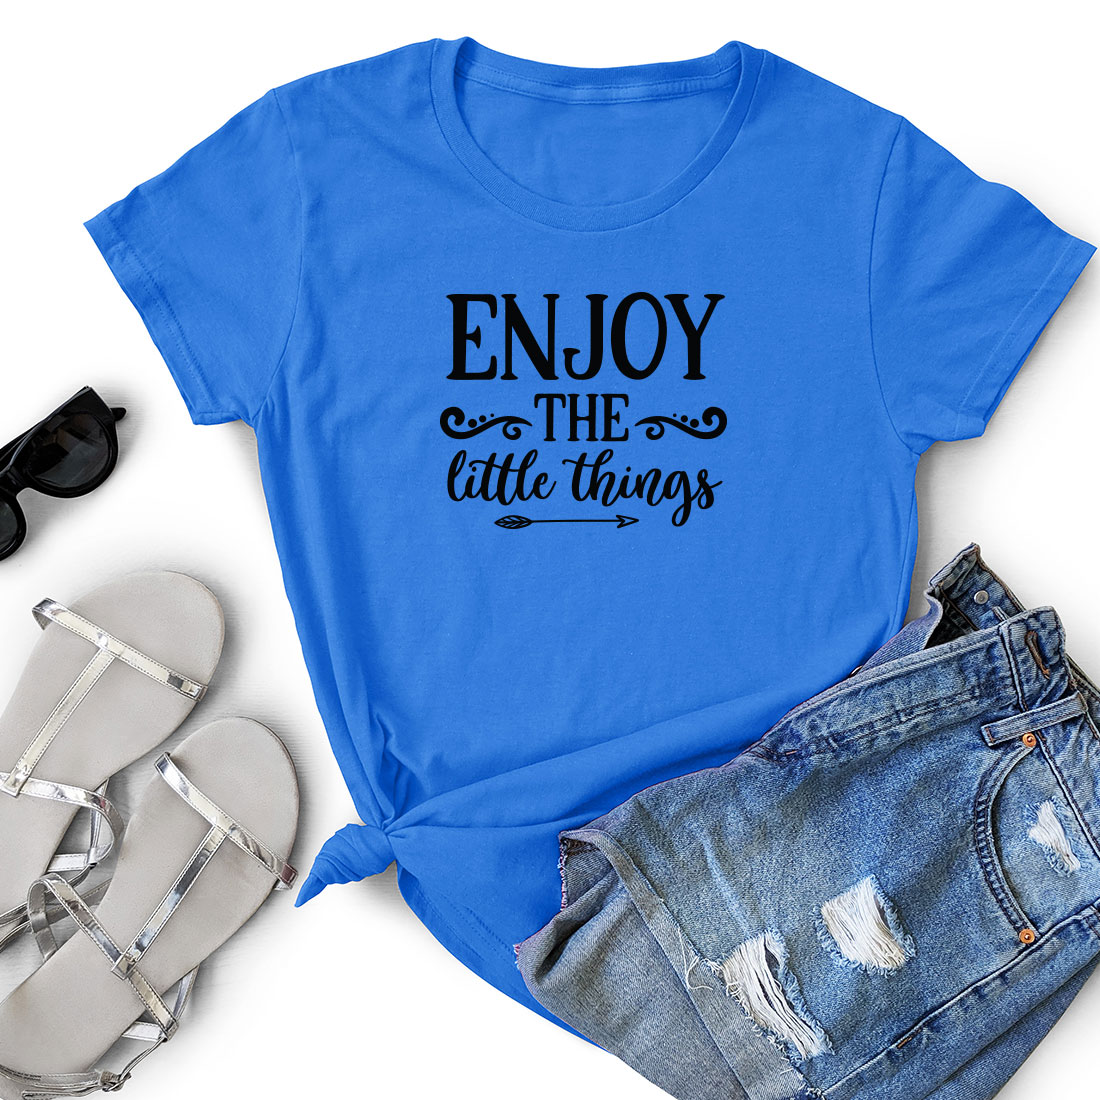 T - shirt that says enjoy the little things next to a pair of shorts.